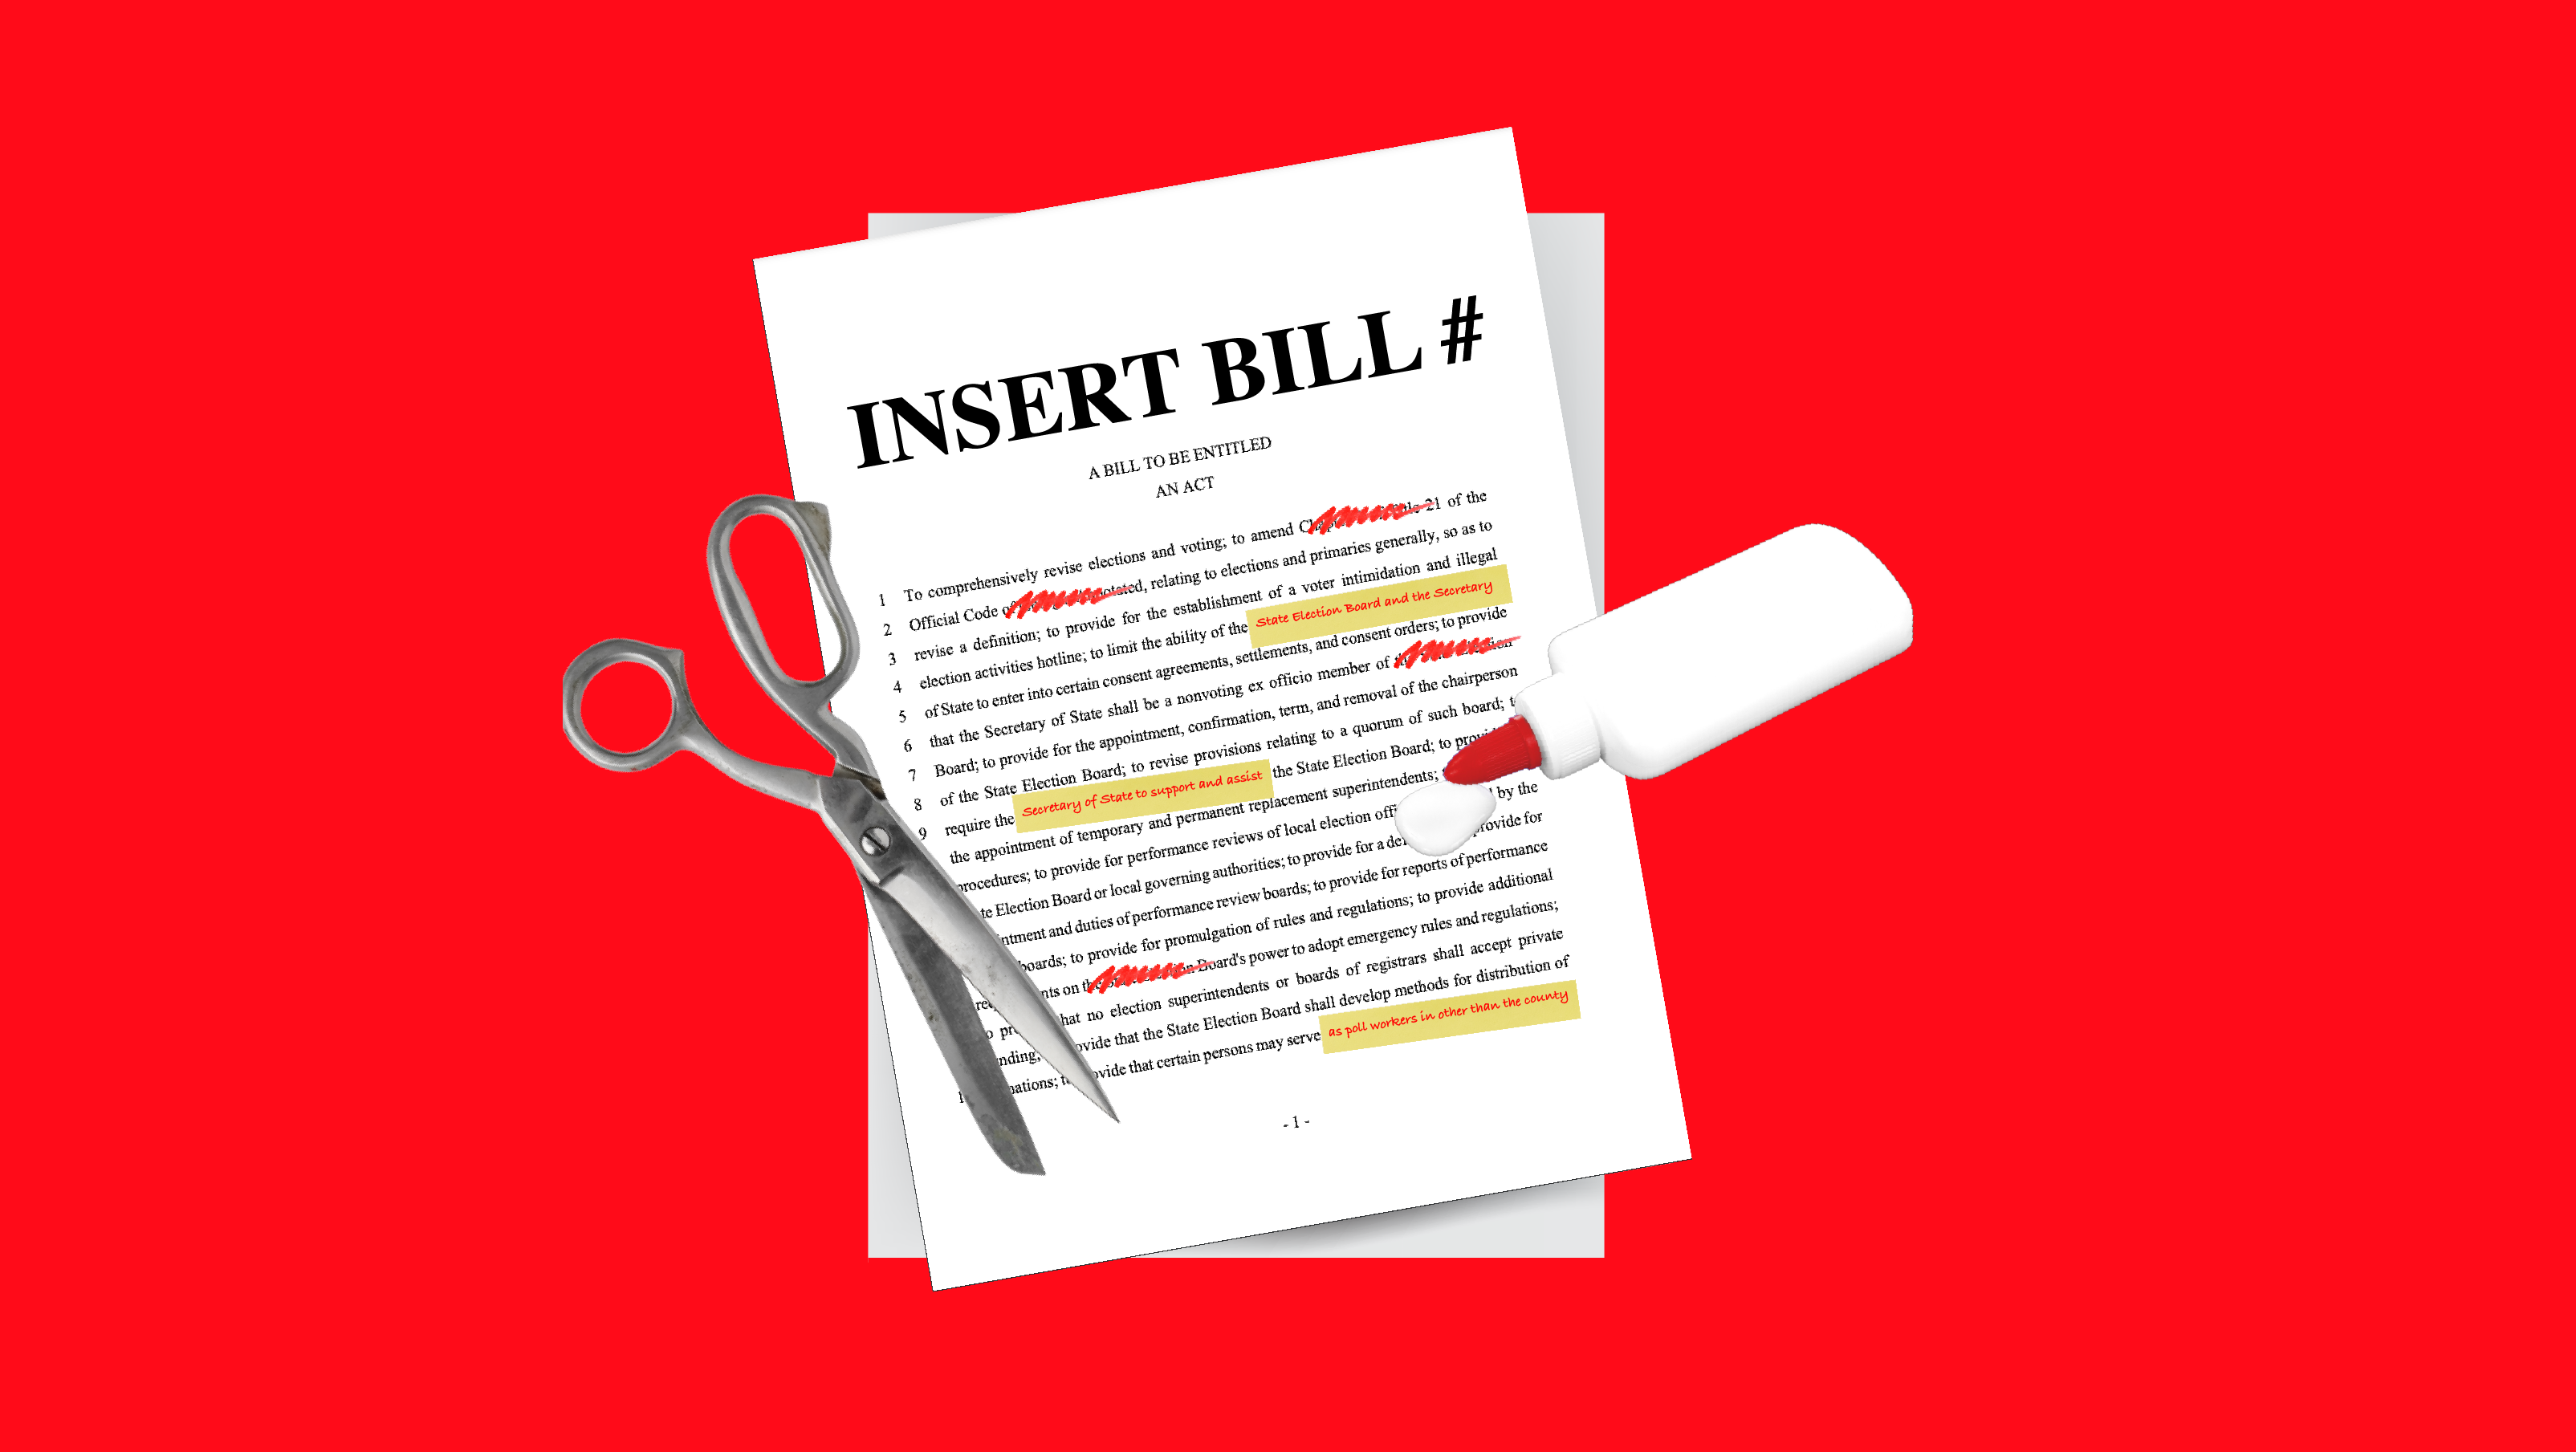 A pair of silver scissors and a glue bottle hovering over an annotated piece of legislation that says "INSERT BILL #"